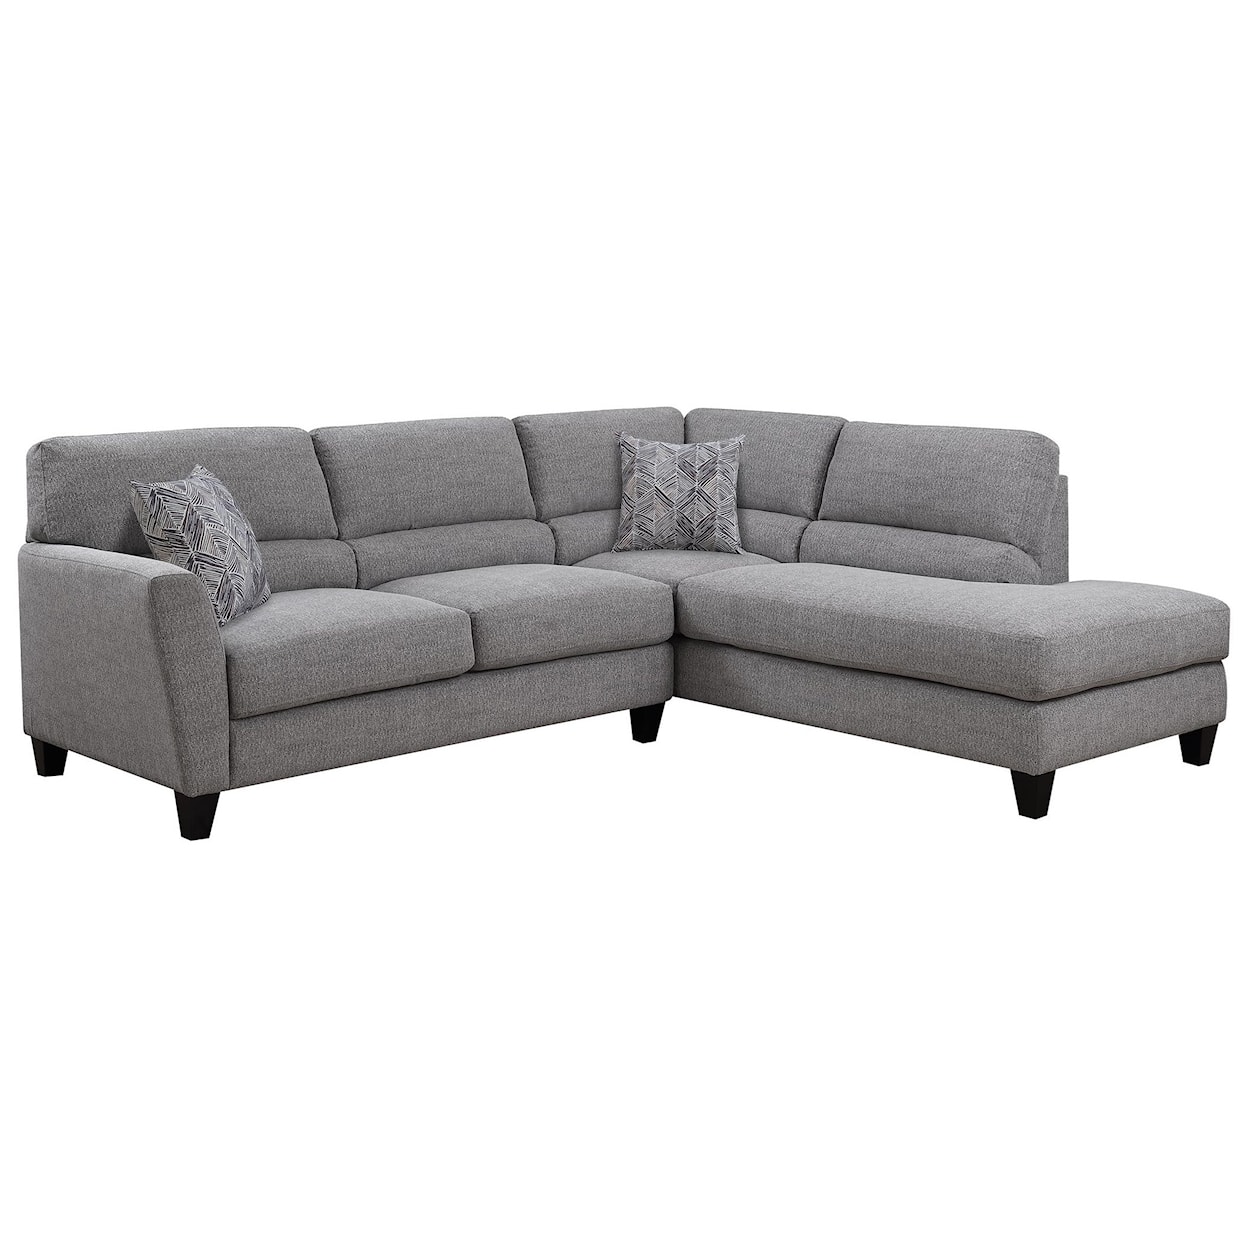 Emerald U3207 Sectional with Chaise